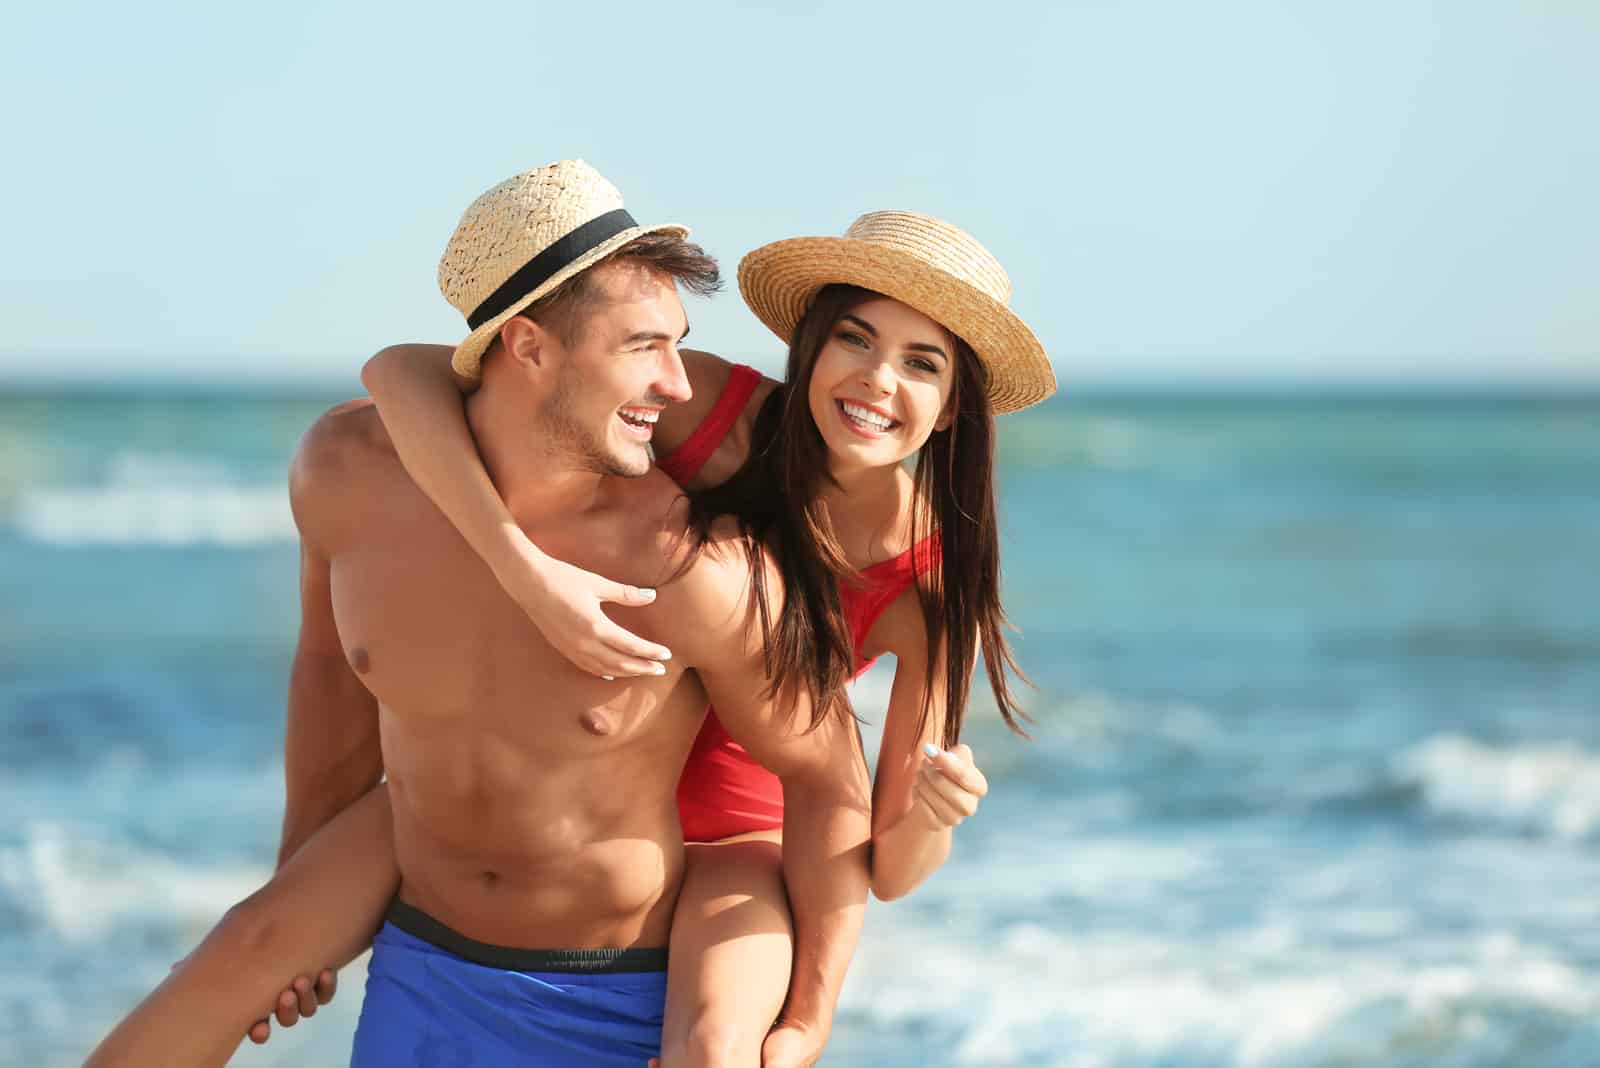 a man carries a woman to the beach and they laugh